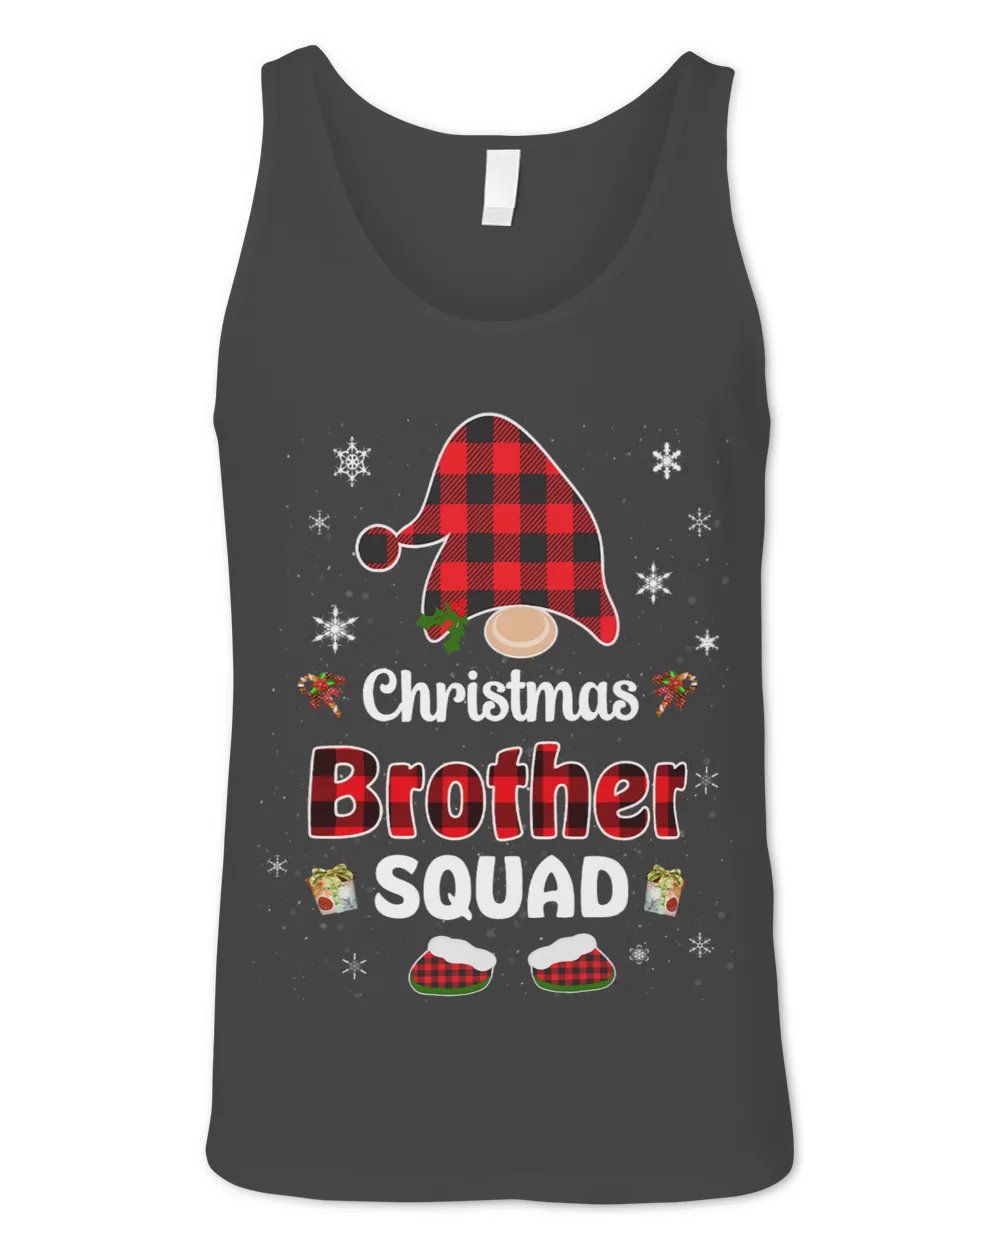 Christmas Brother squad family group matching red plaid